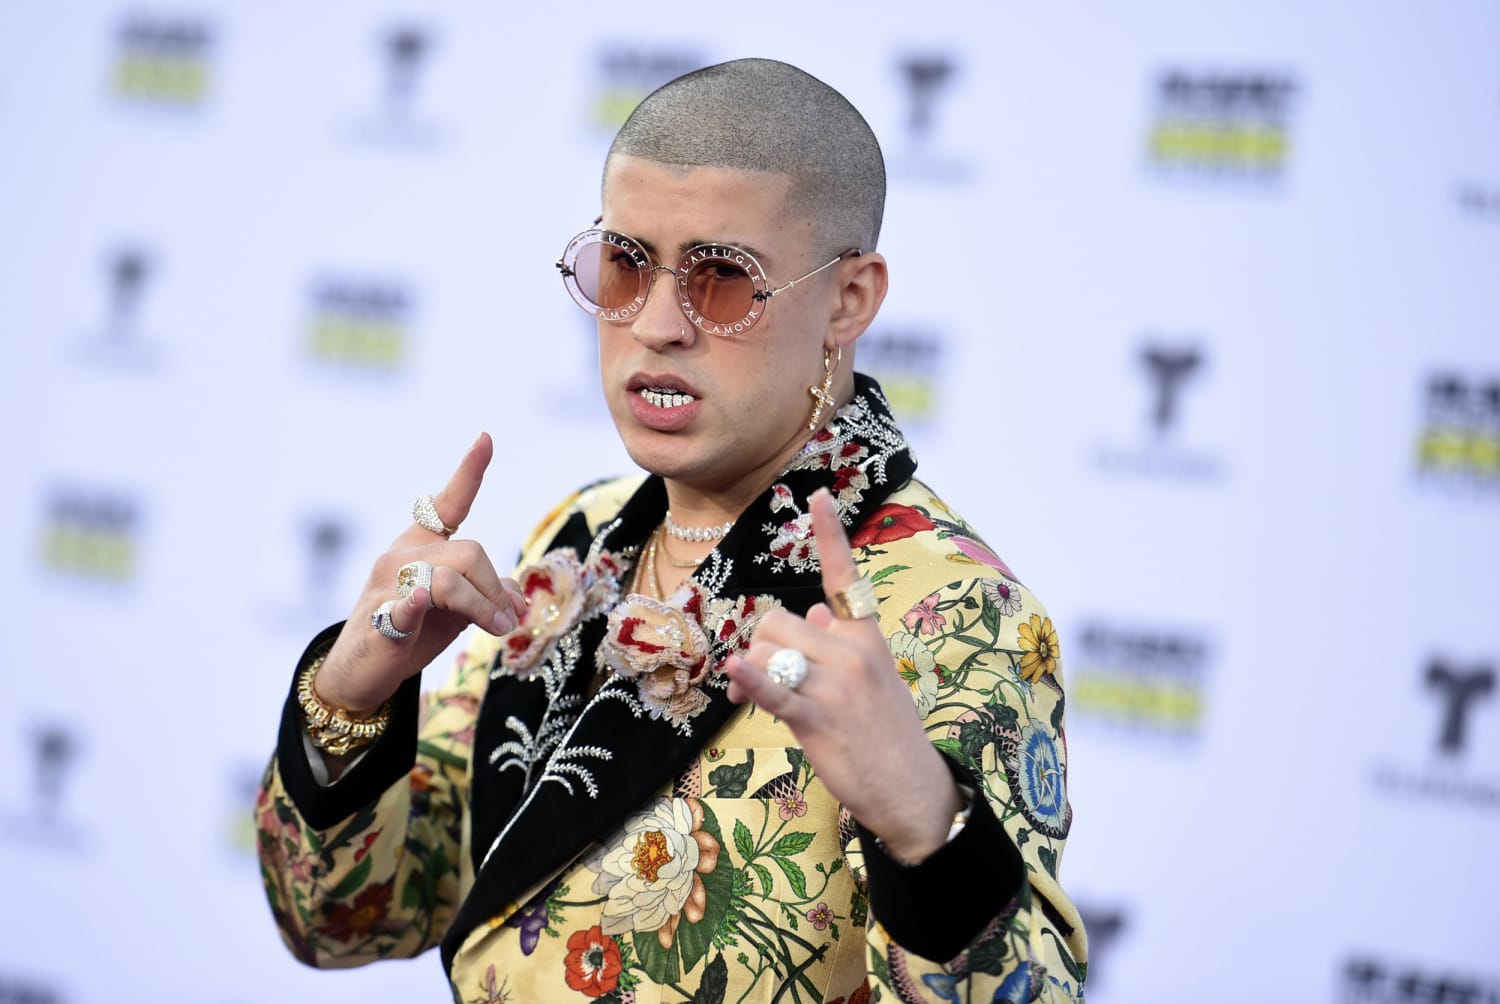 Bad Bunny is off to a great 2019